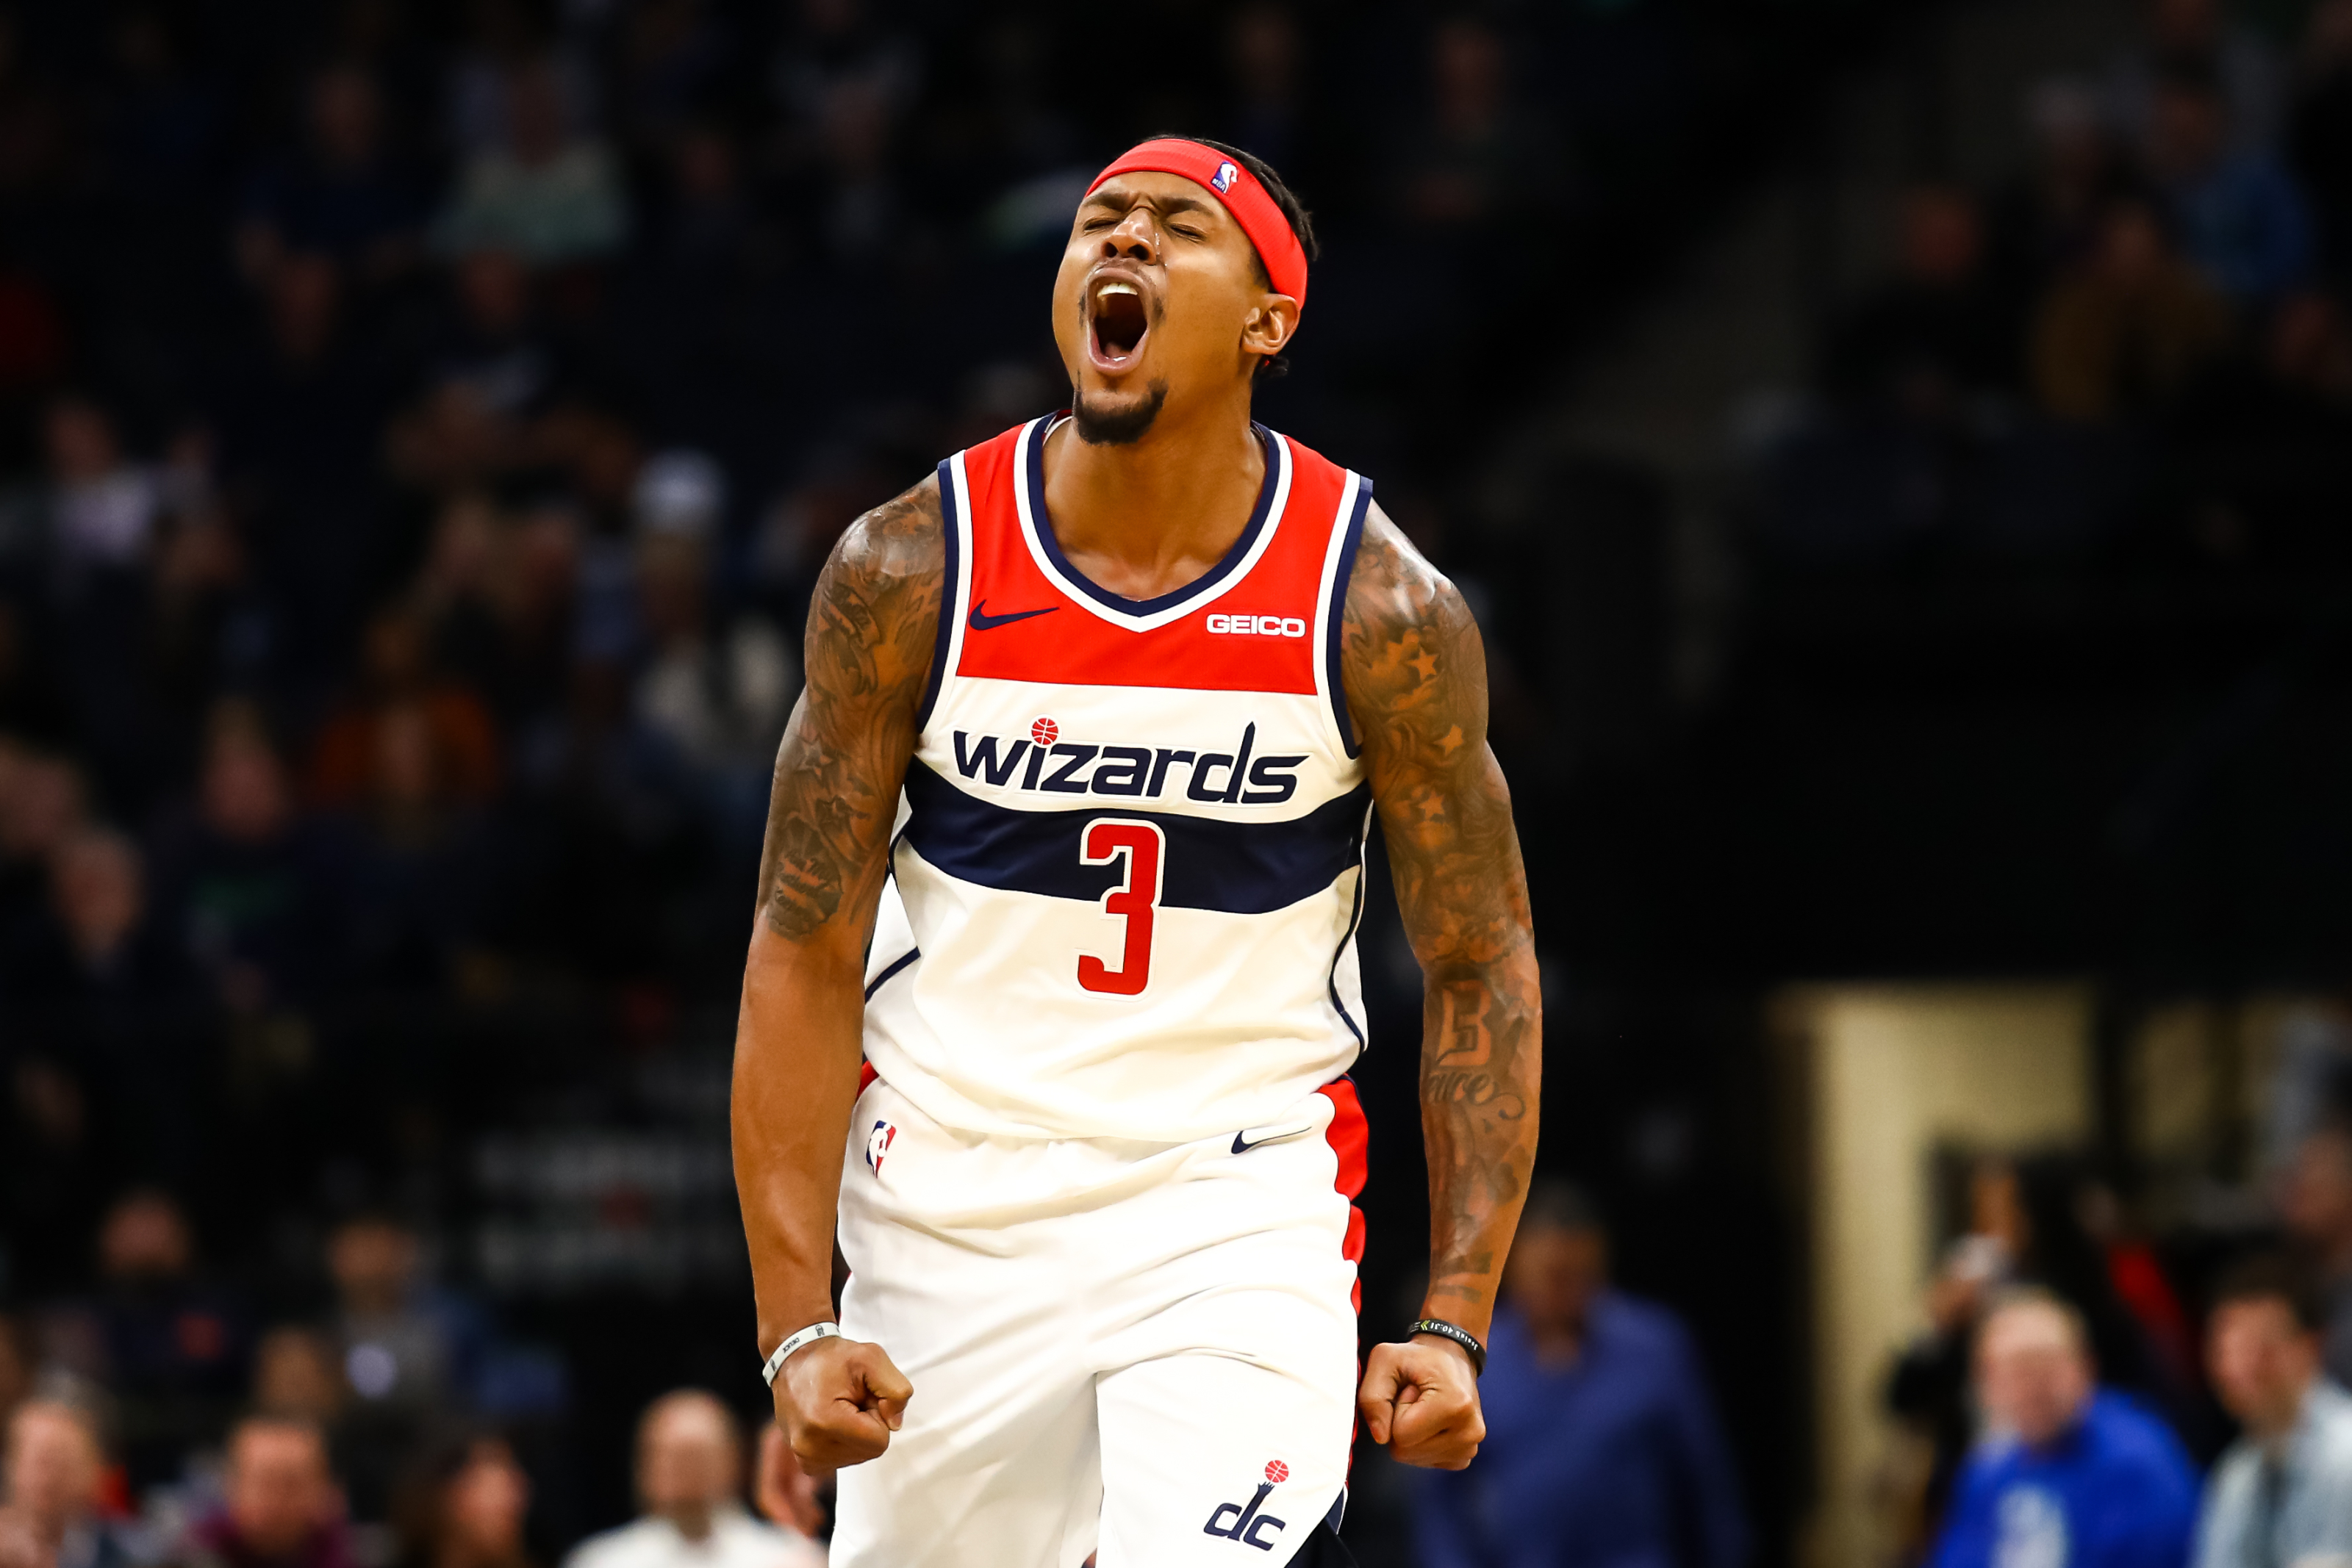 Ahead of All-Star Game, Bradley Beal is All In on the Washington